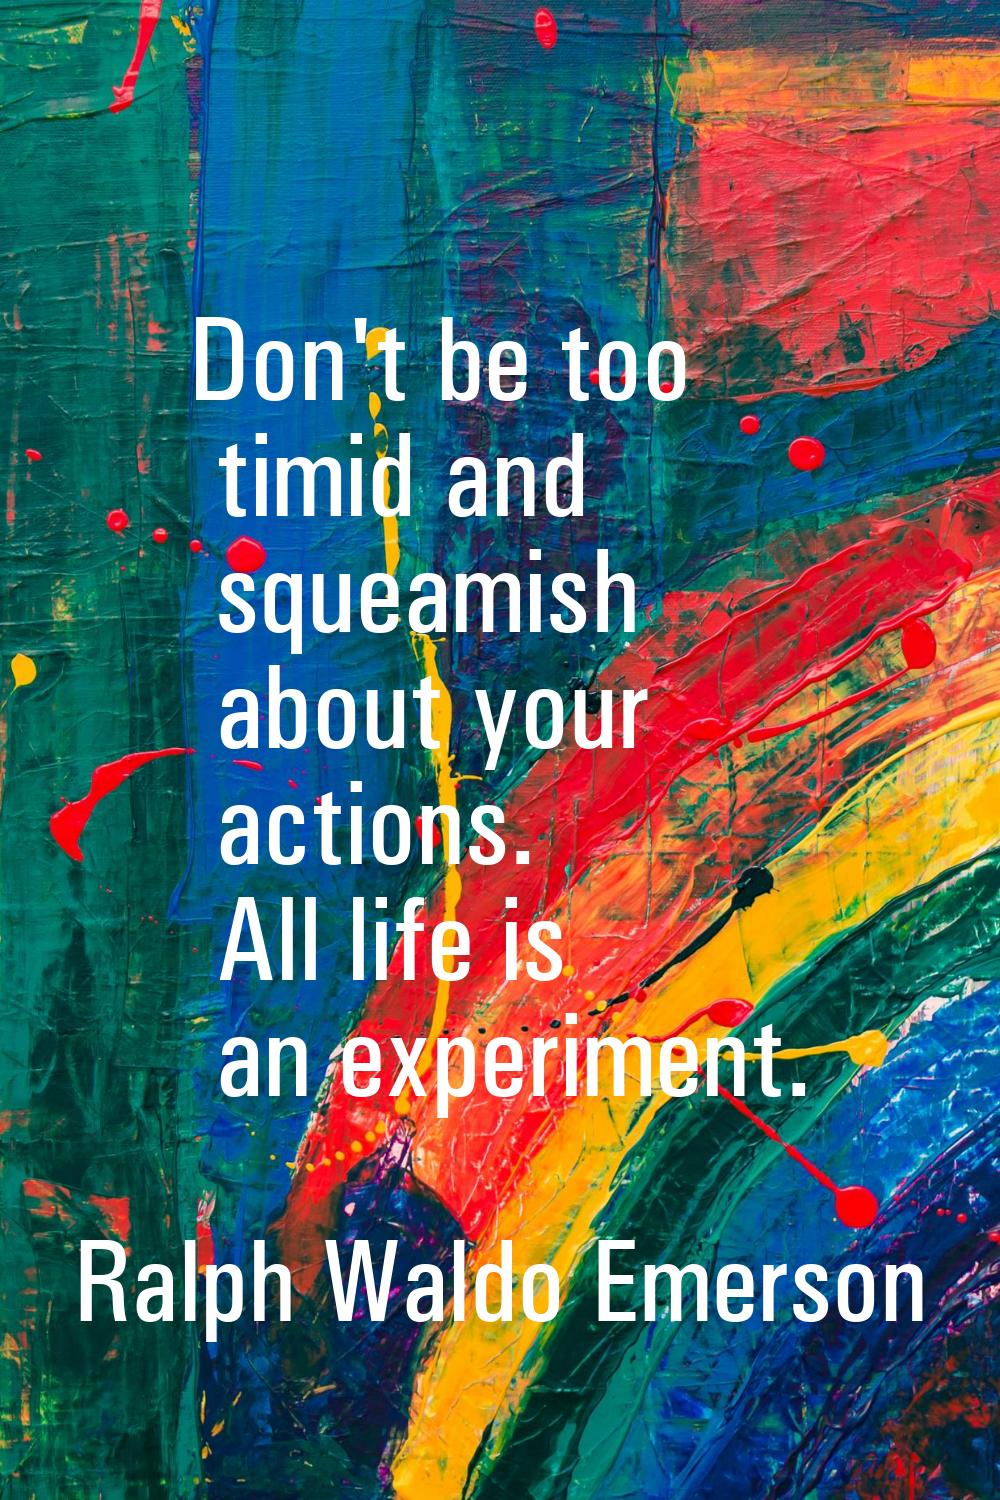 Don't be too timid and squeamish about your actions. All life is an experiment.